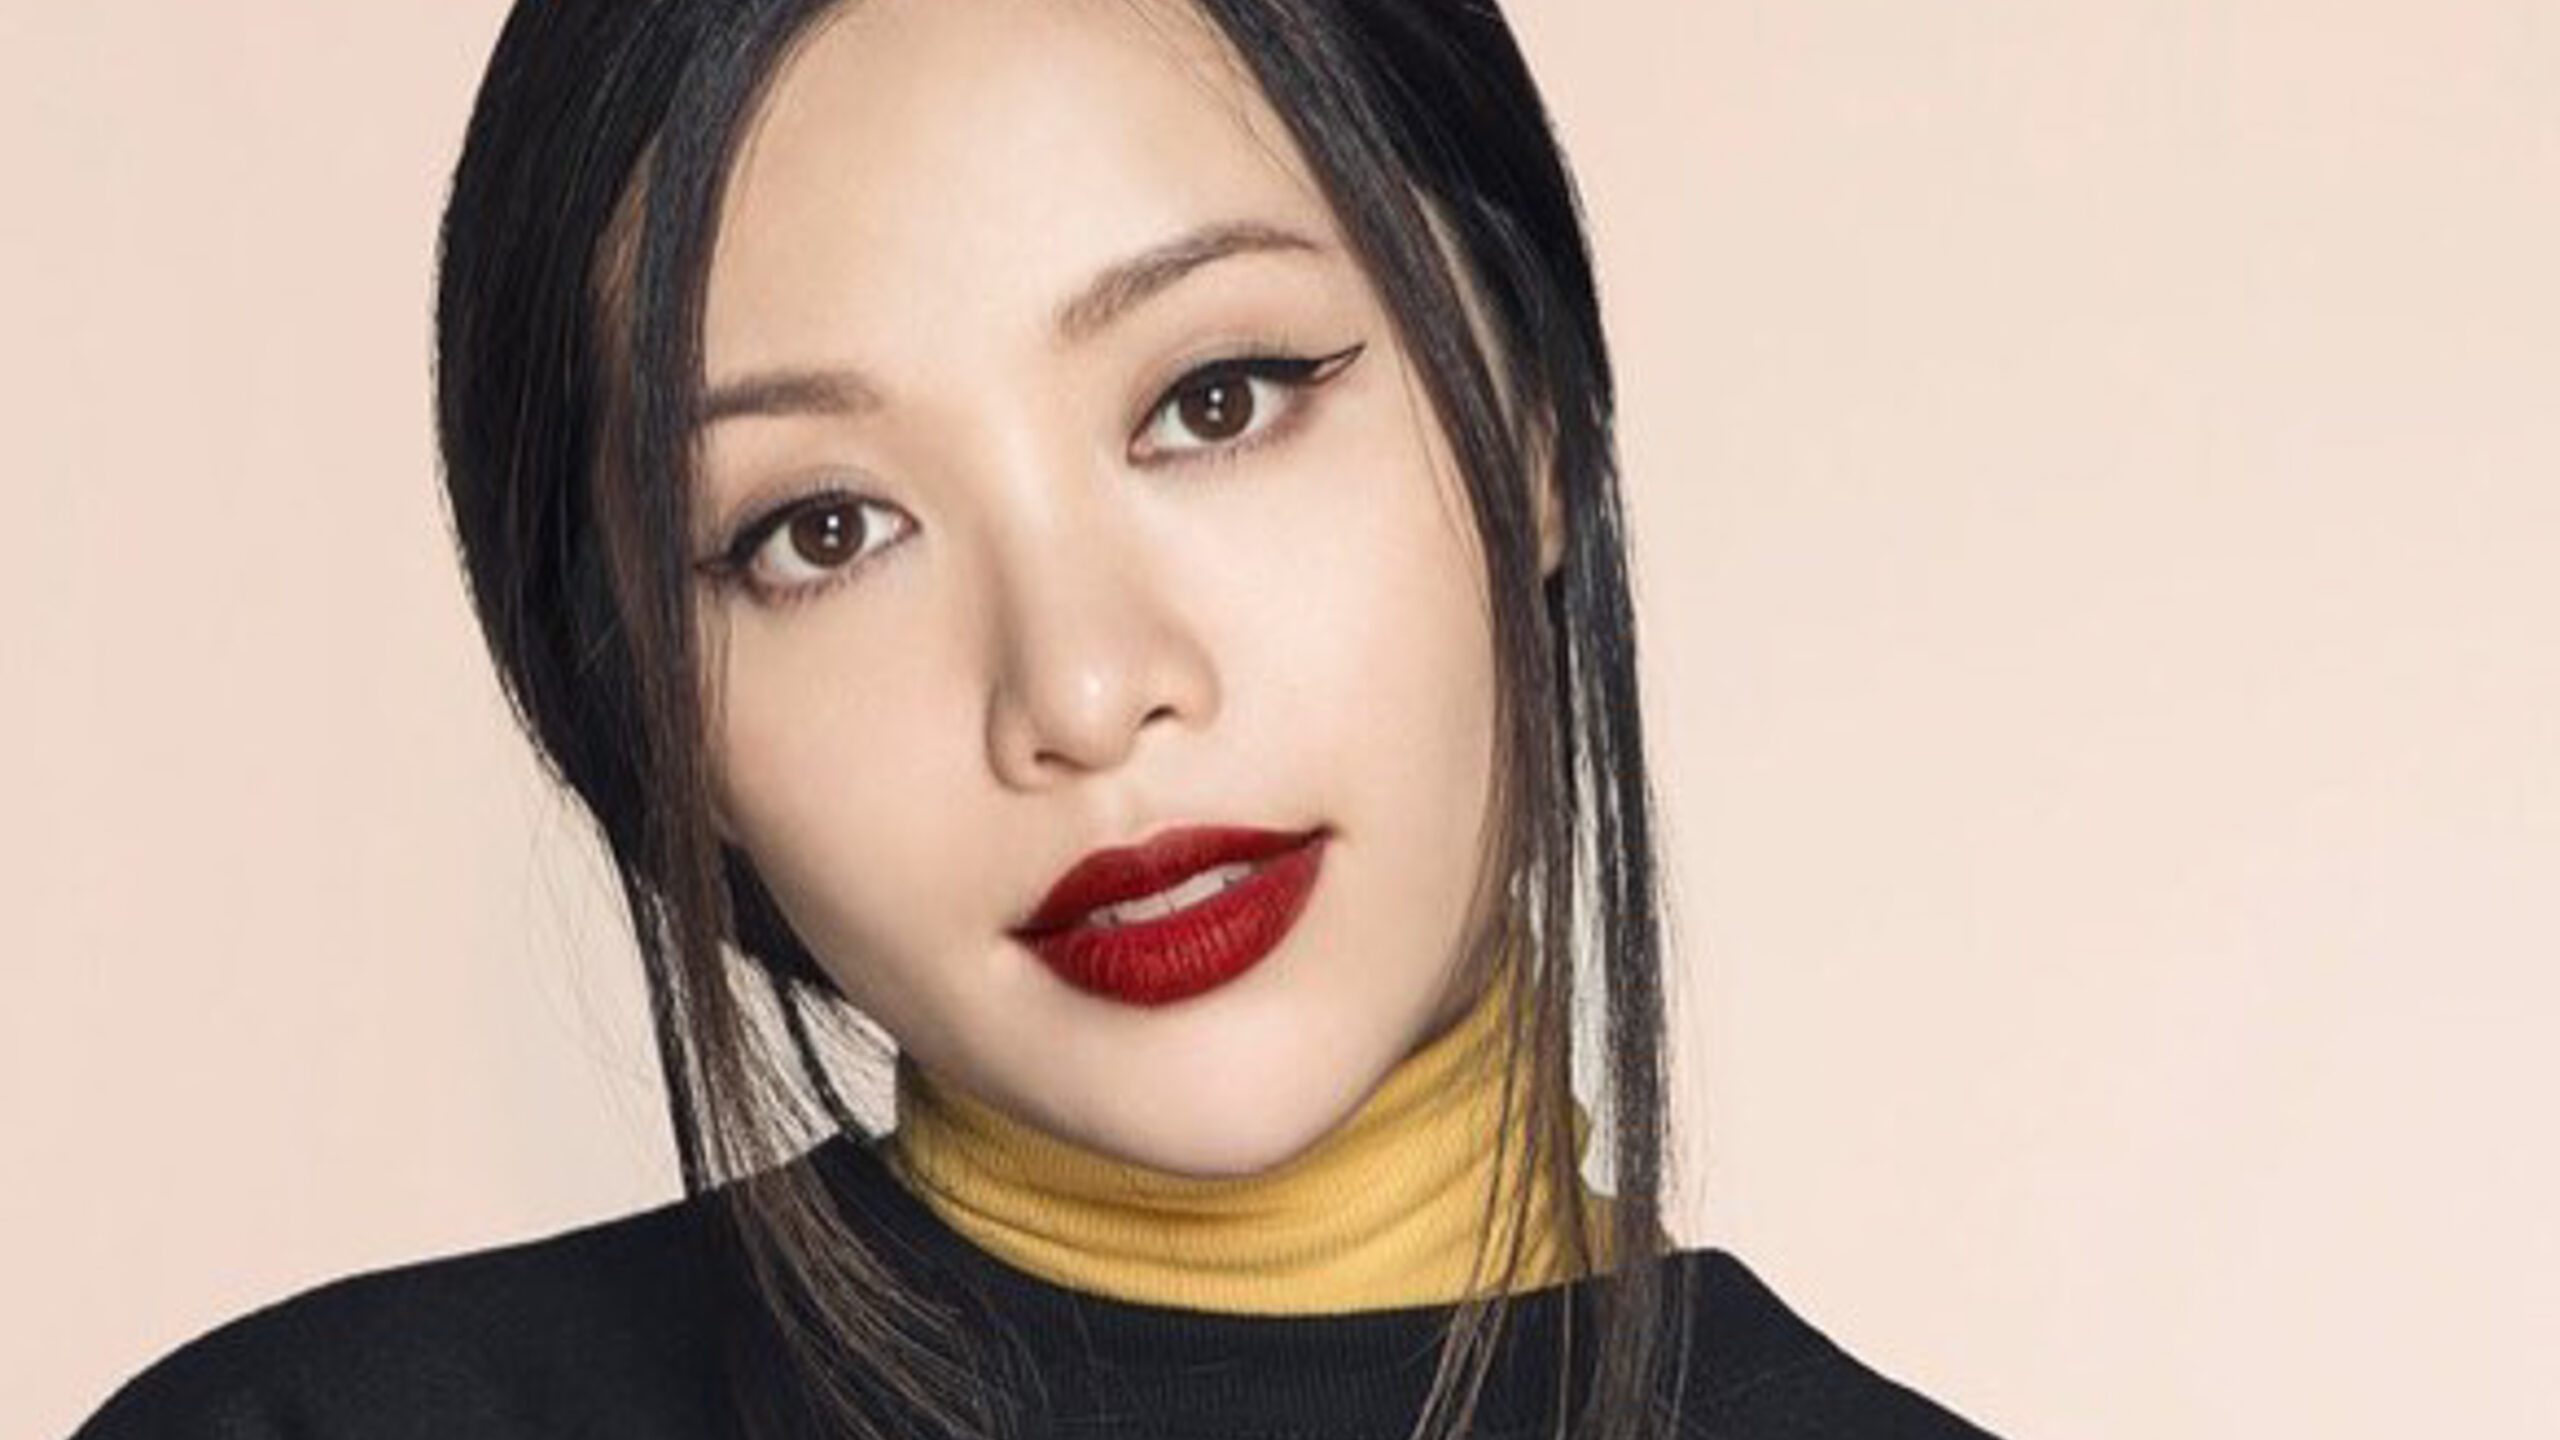 WATCH: Michelle Phan explains why she left YouTube